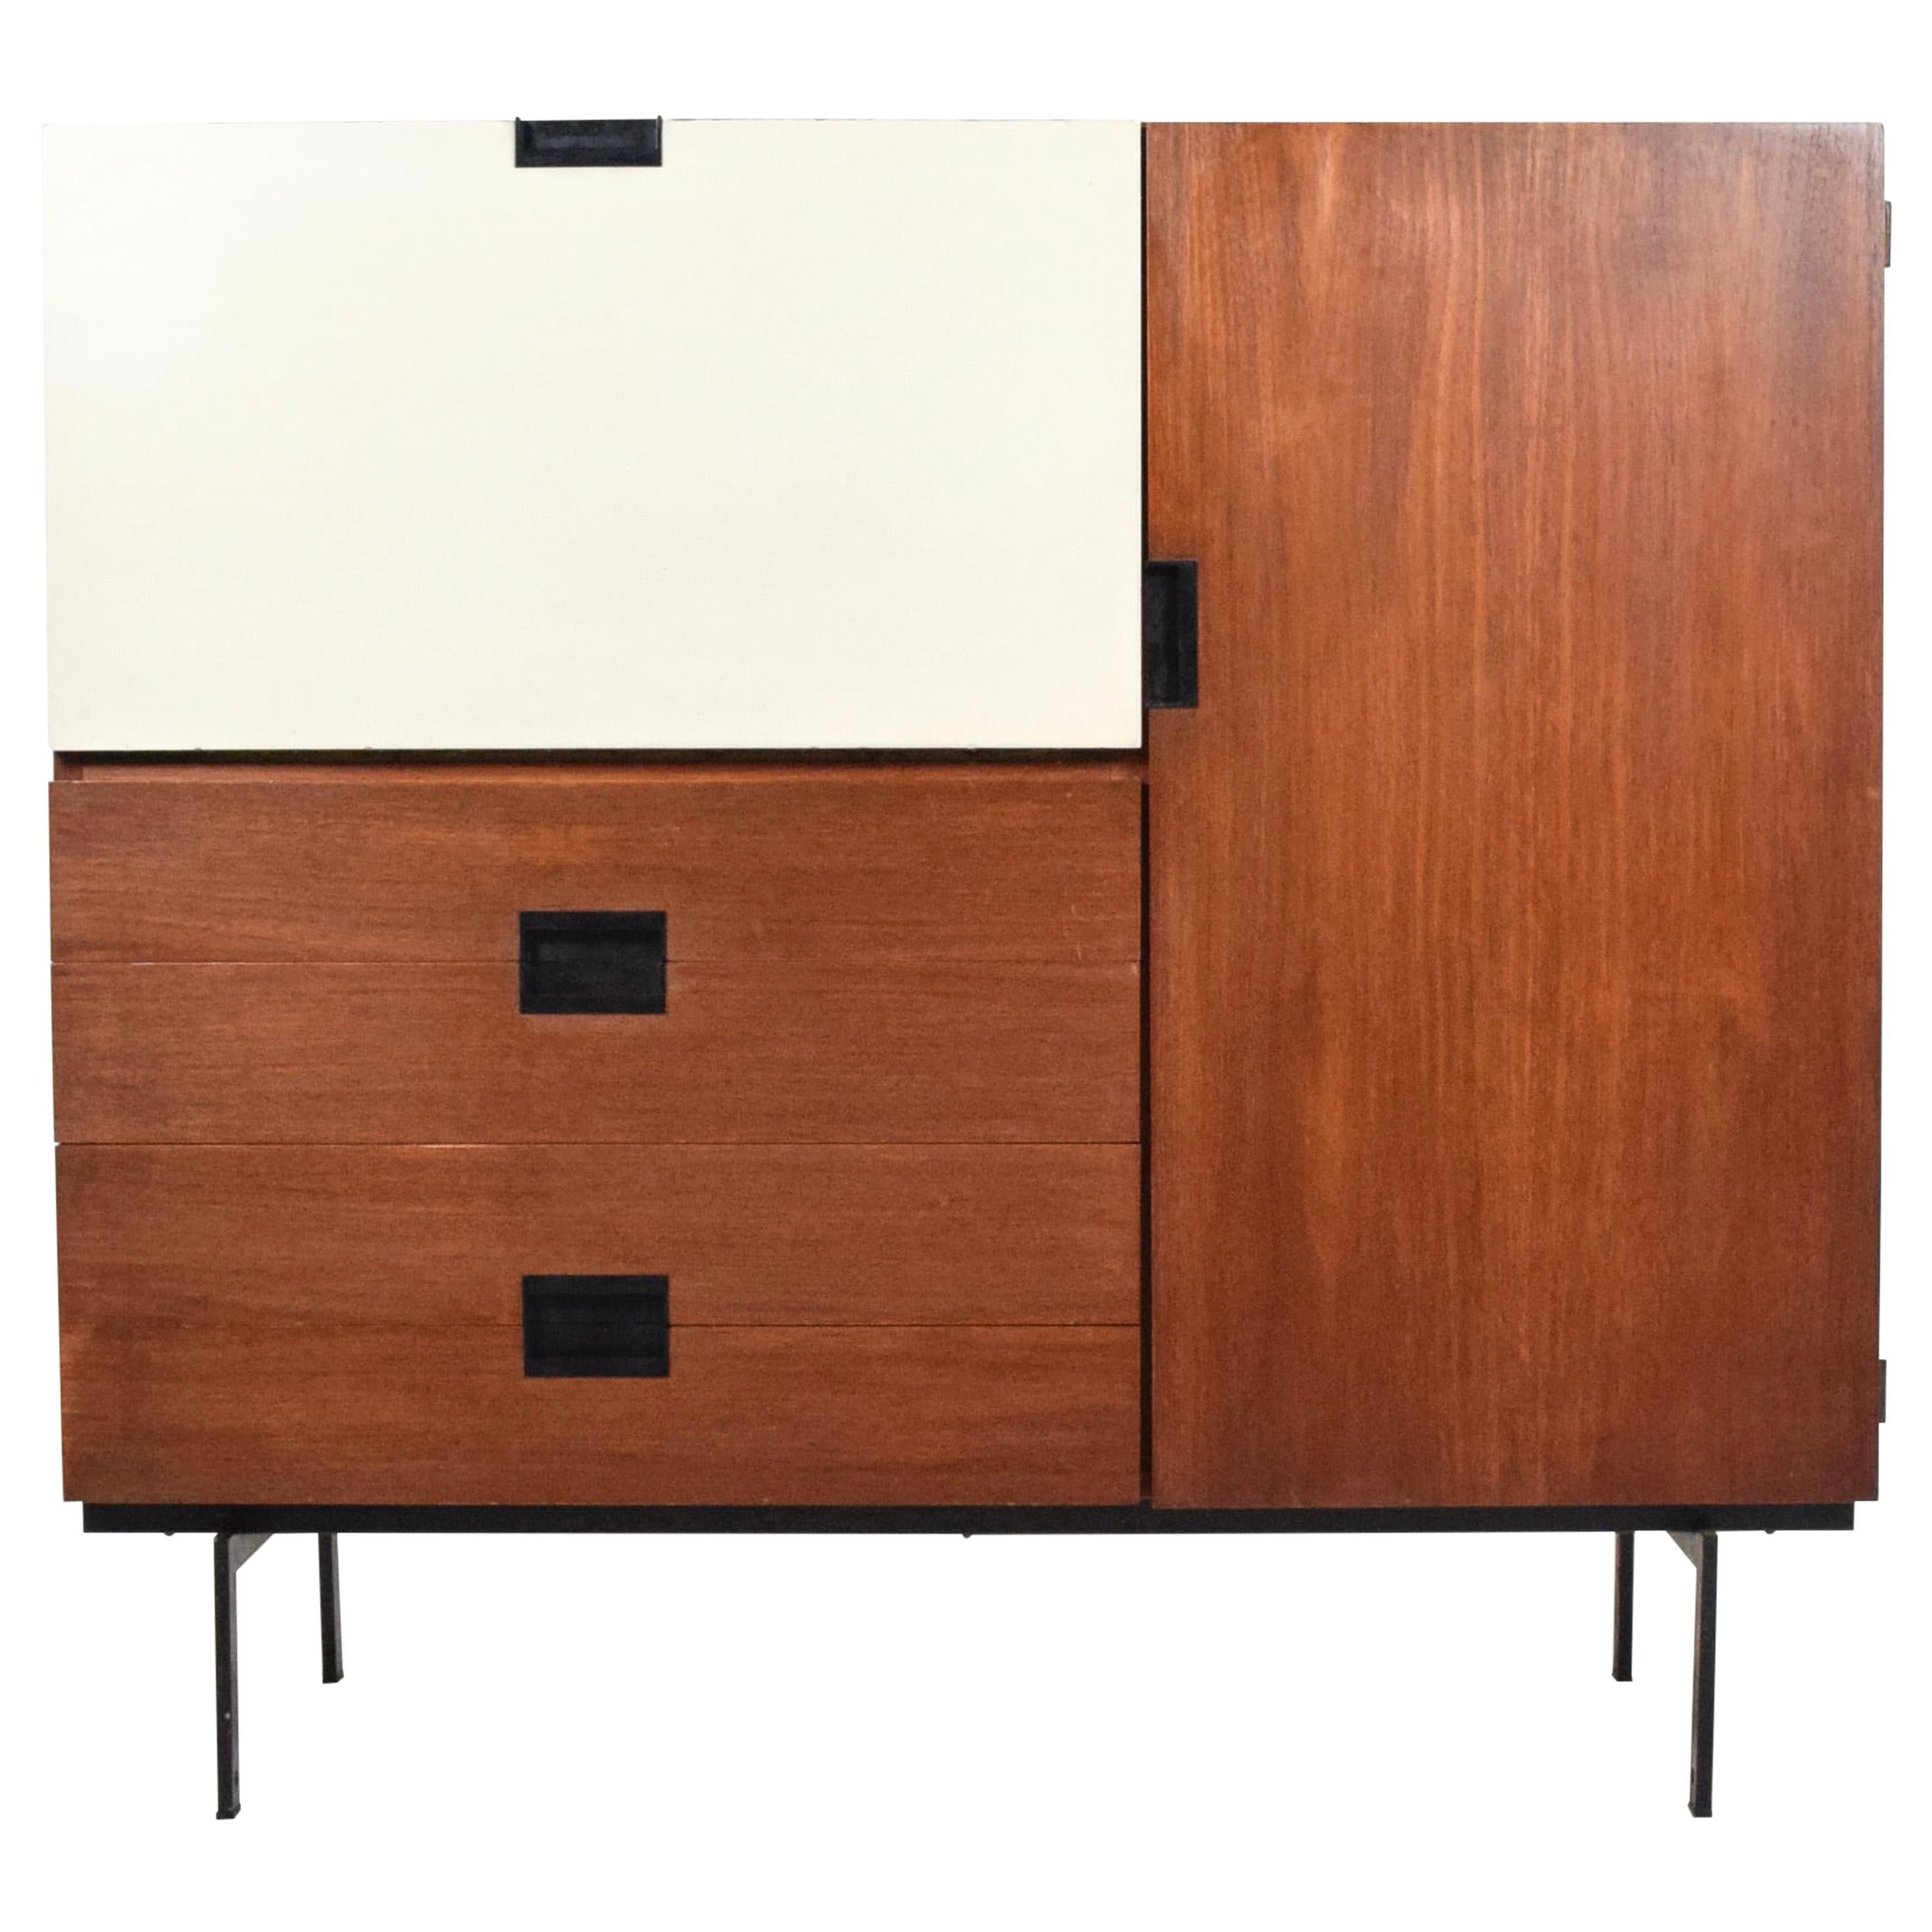 Highboard CU06 by Cees Braakman for Pastoe, Japan Series, The Netherlands 1960s